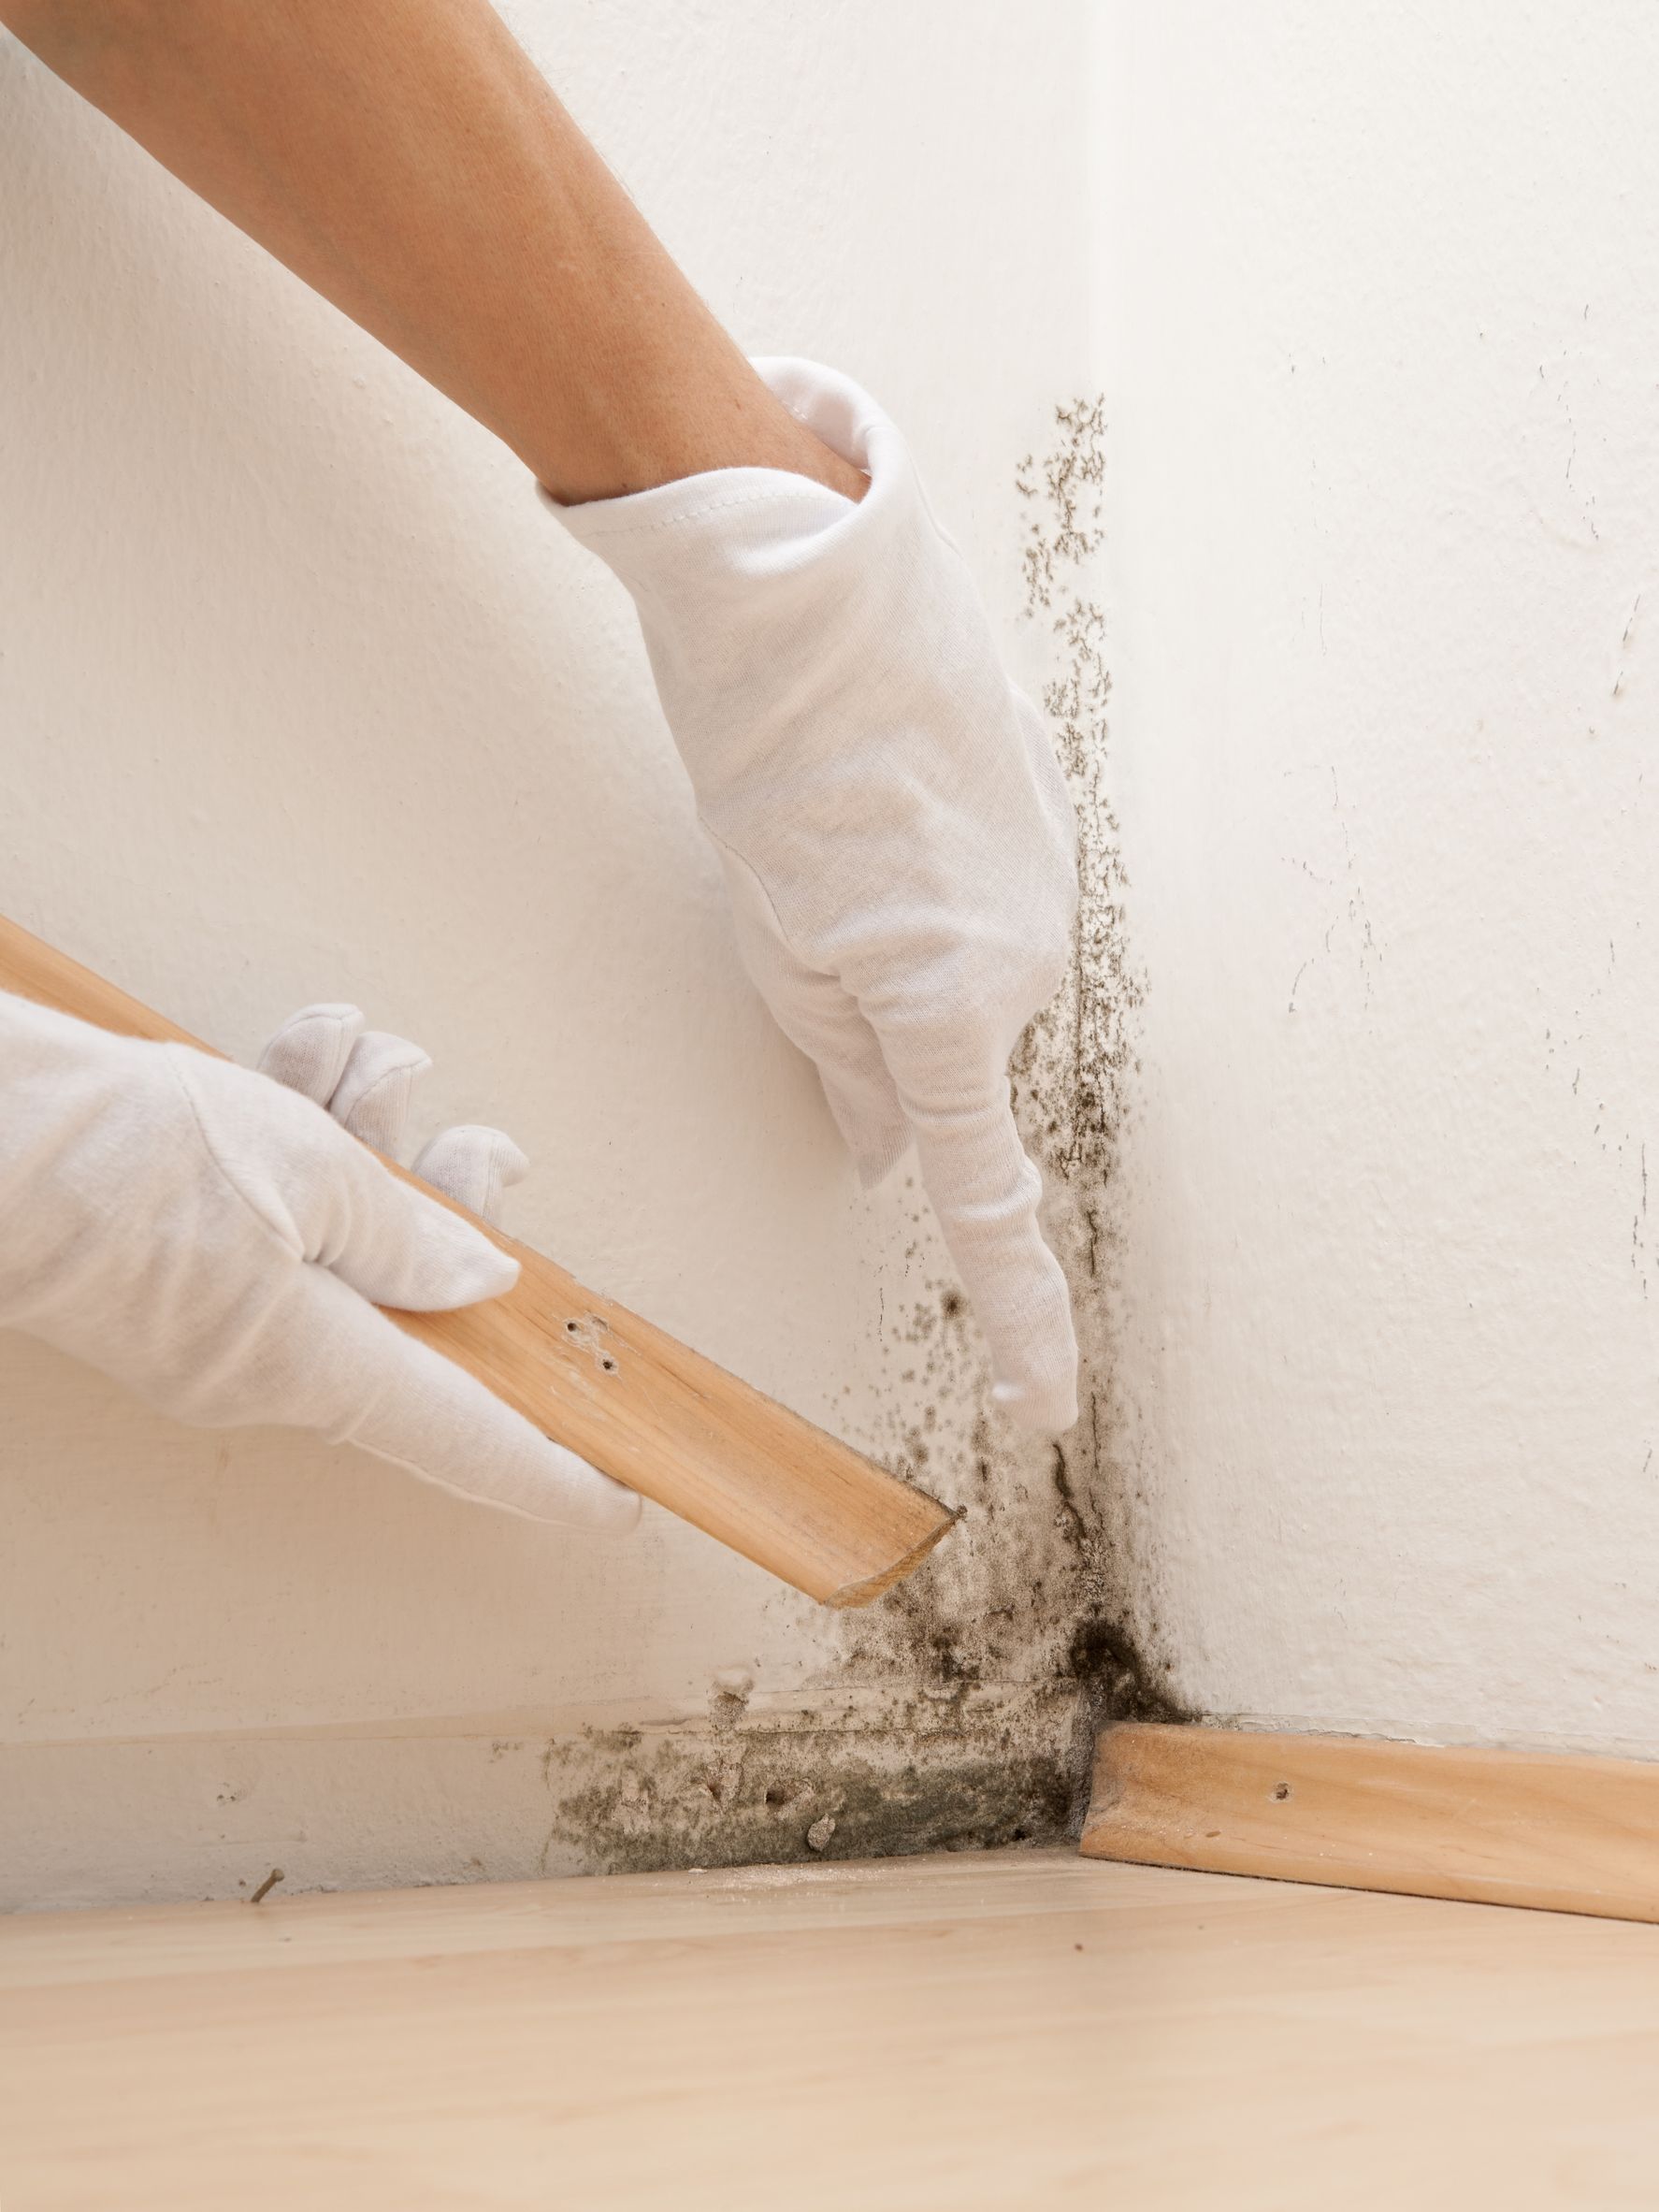 The Advantages Of Professional Mold Treatment Services In Fairfax, VA